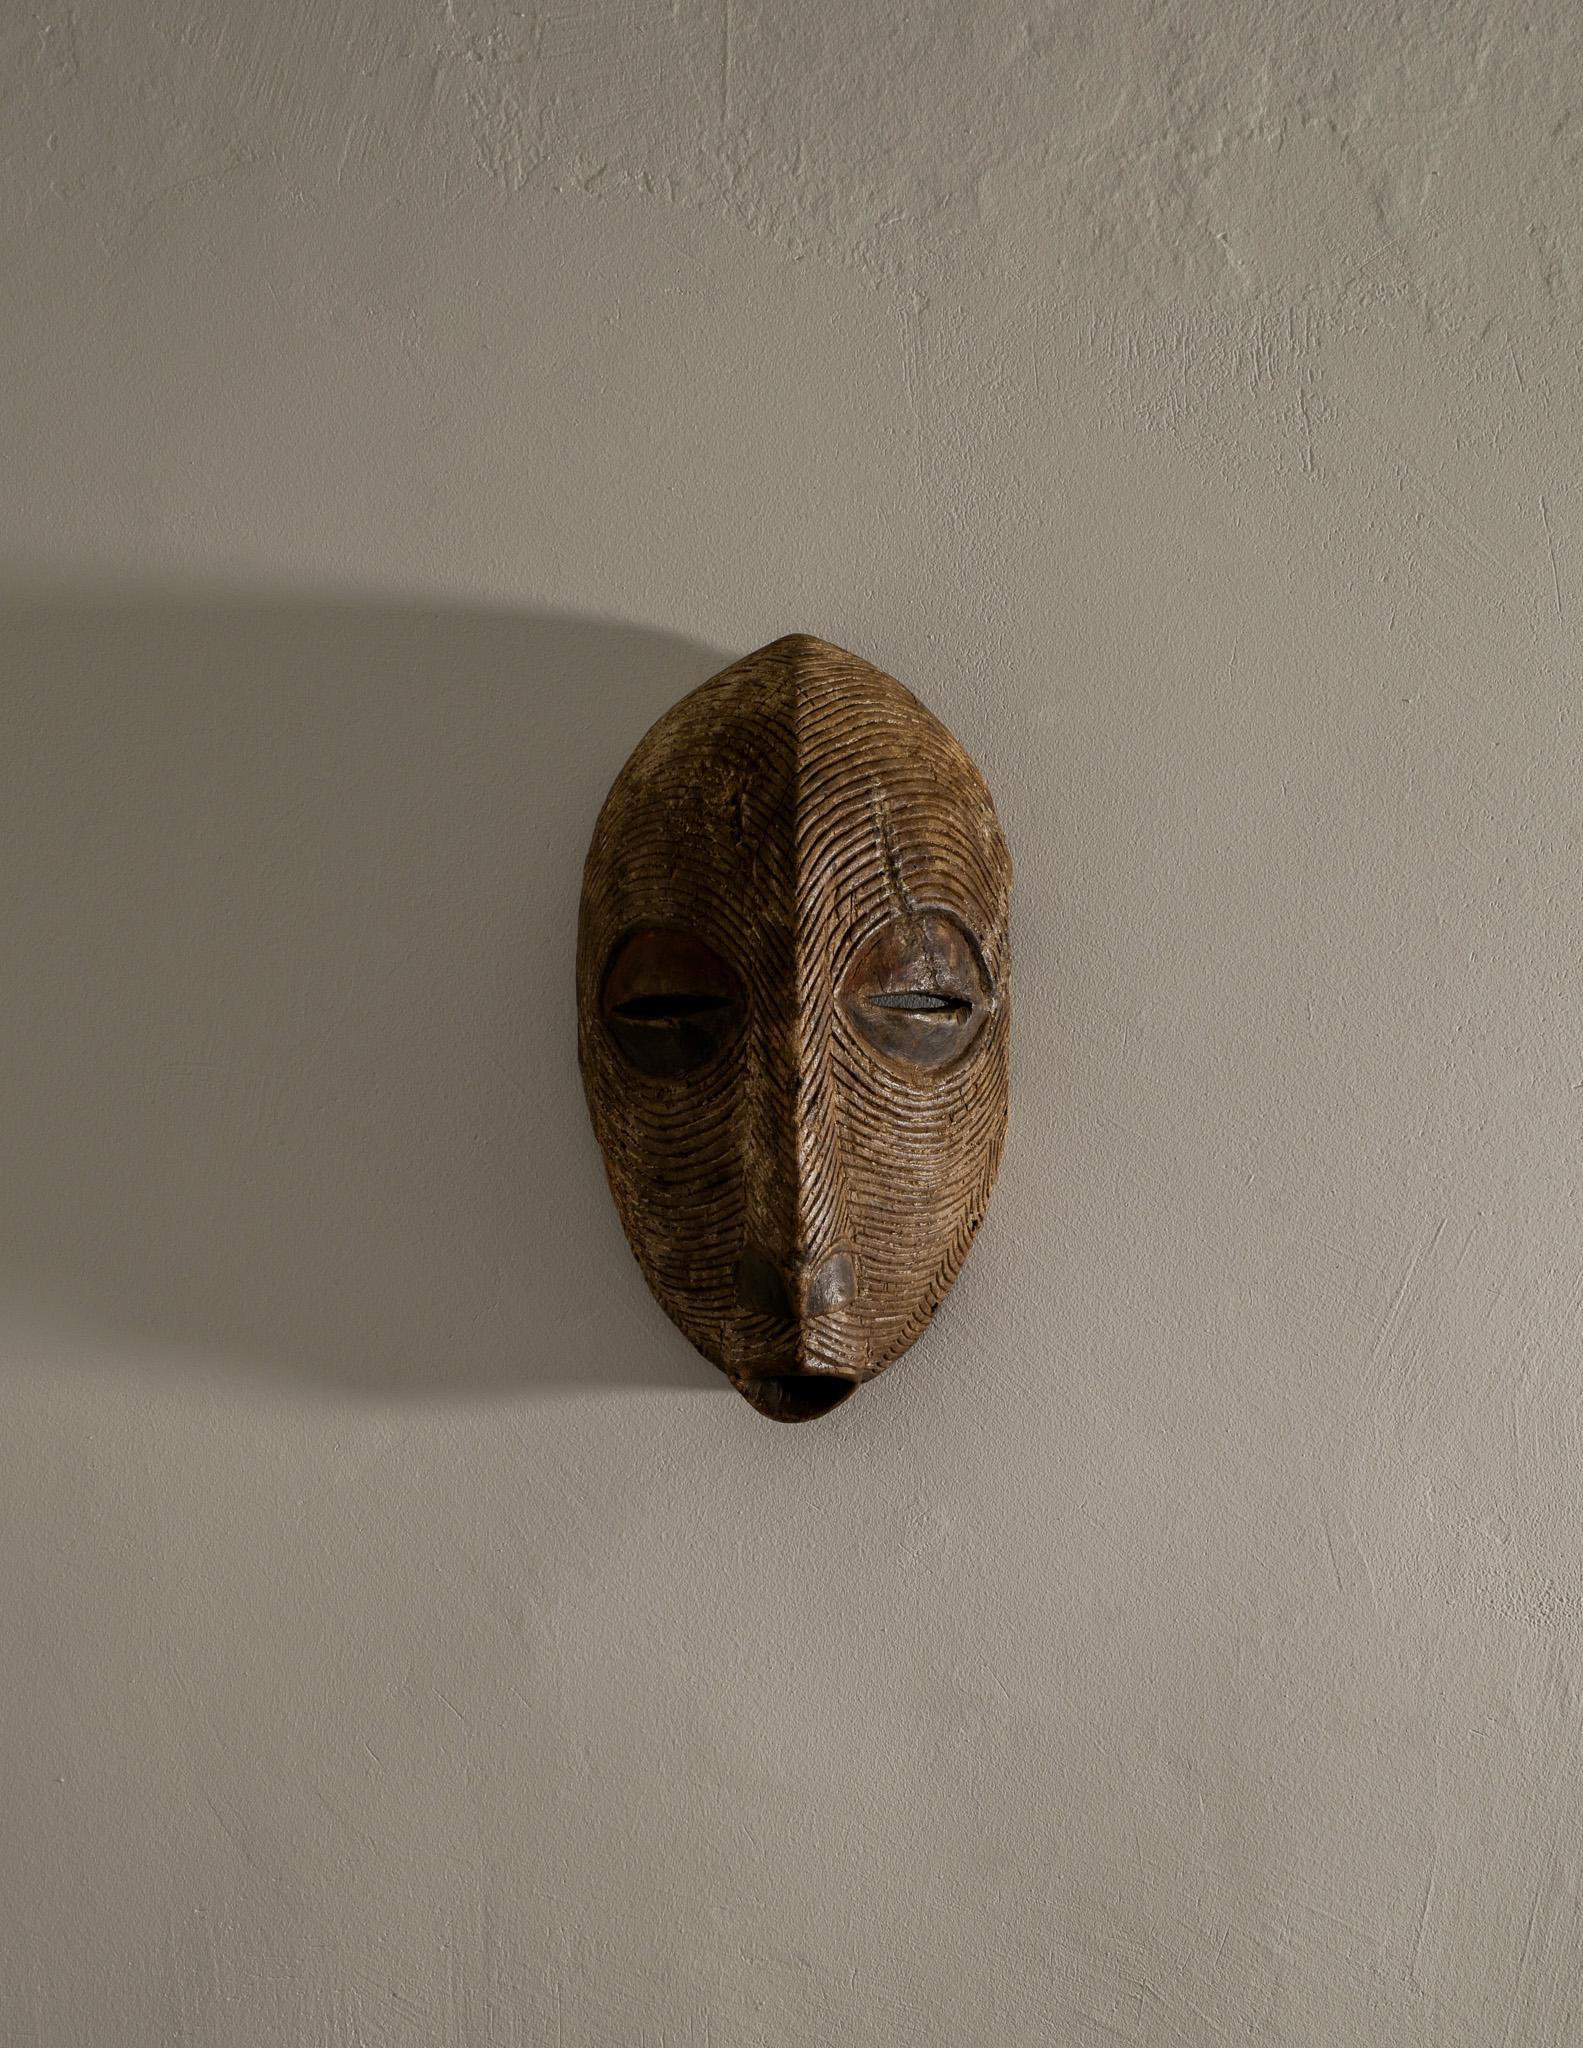 Decorative African tribal mid century wooden Kifwebe mask for wall hanging. In great vintage and original condition. Most likely produced during the 1950-1960s. 

Dimensions: H: 50 cm W: 29 cm Depth: 16 cm
